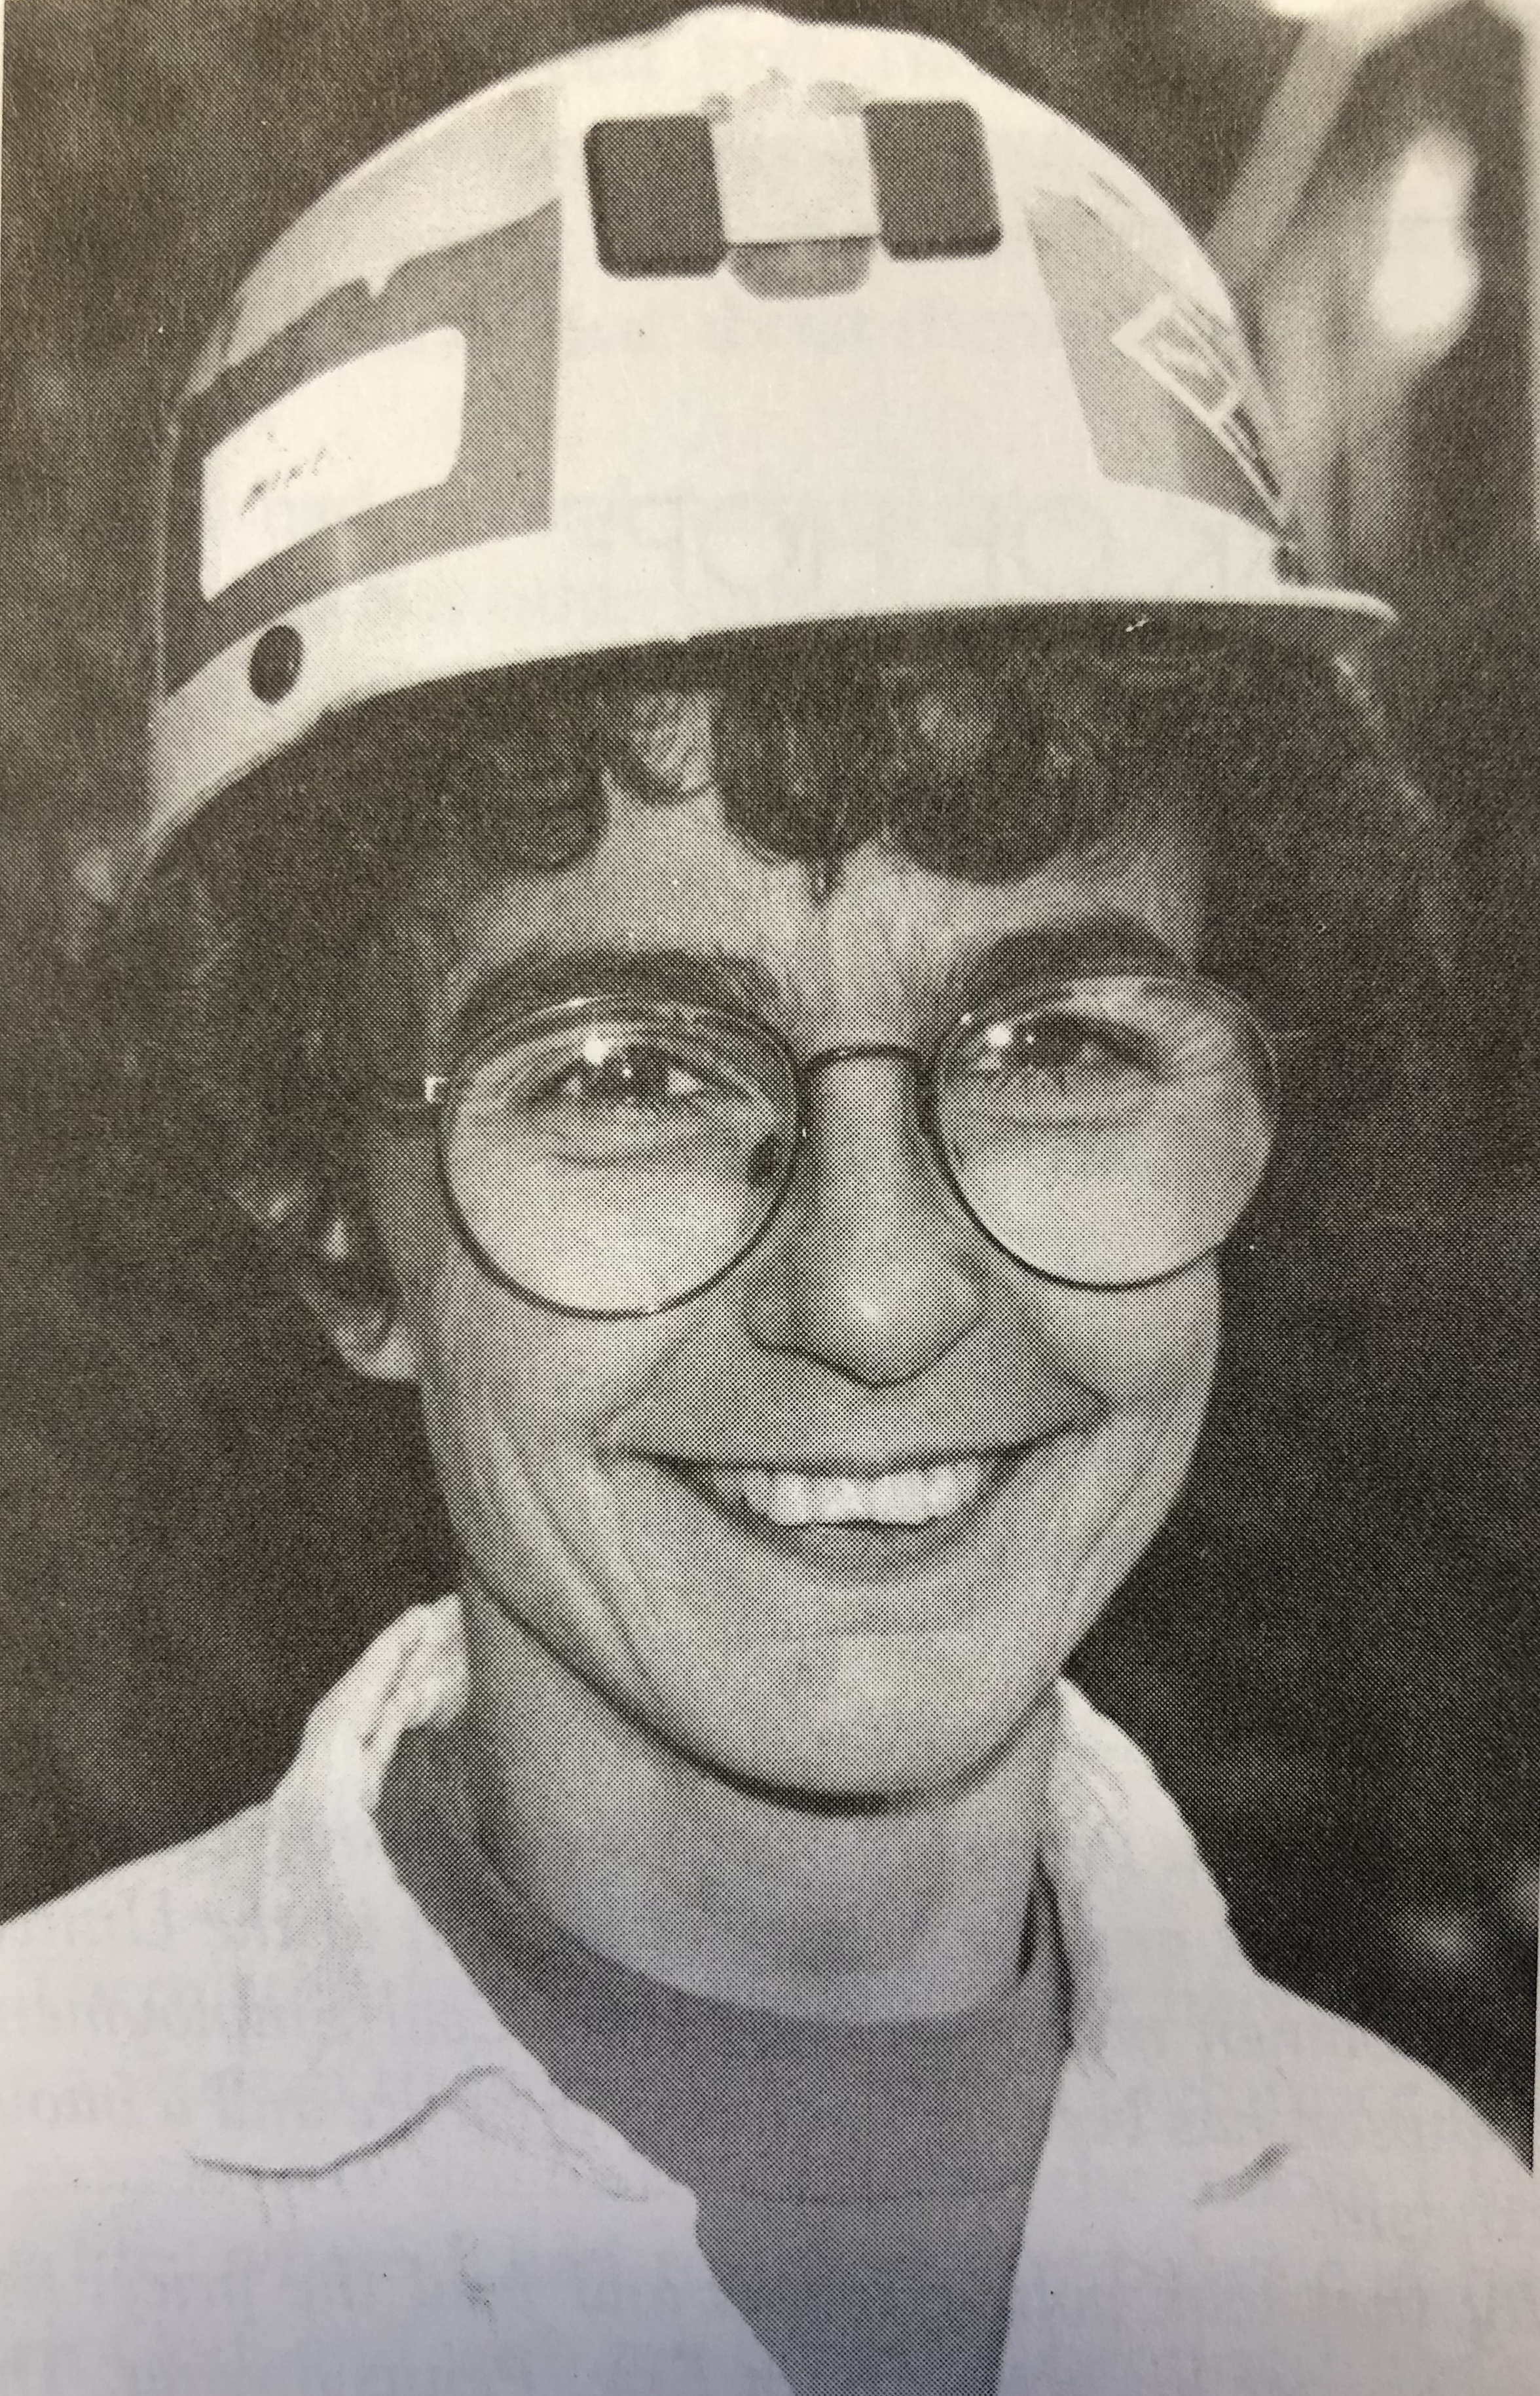 A black and white photo of young Kipp Dawson with glasses and a mining helmet.